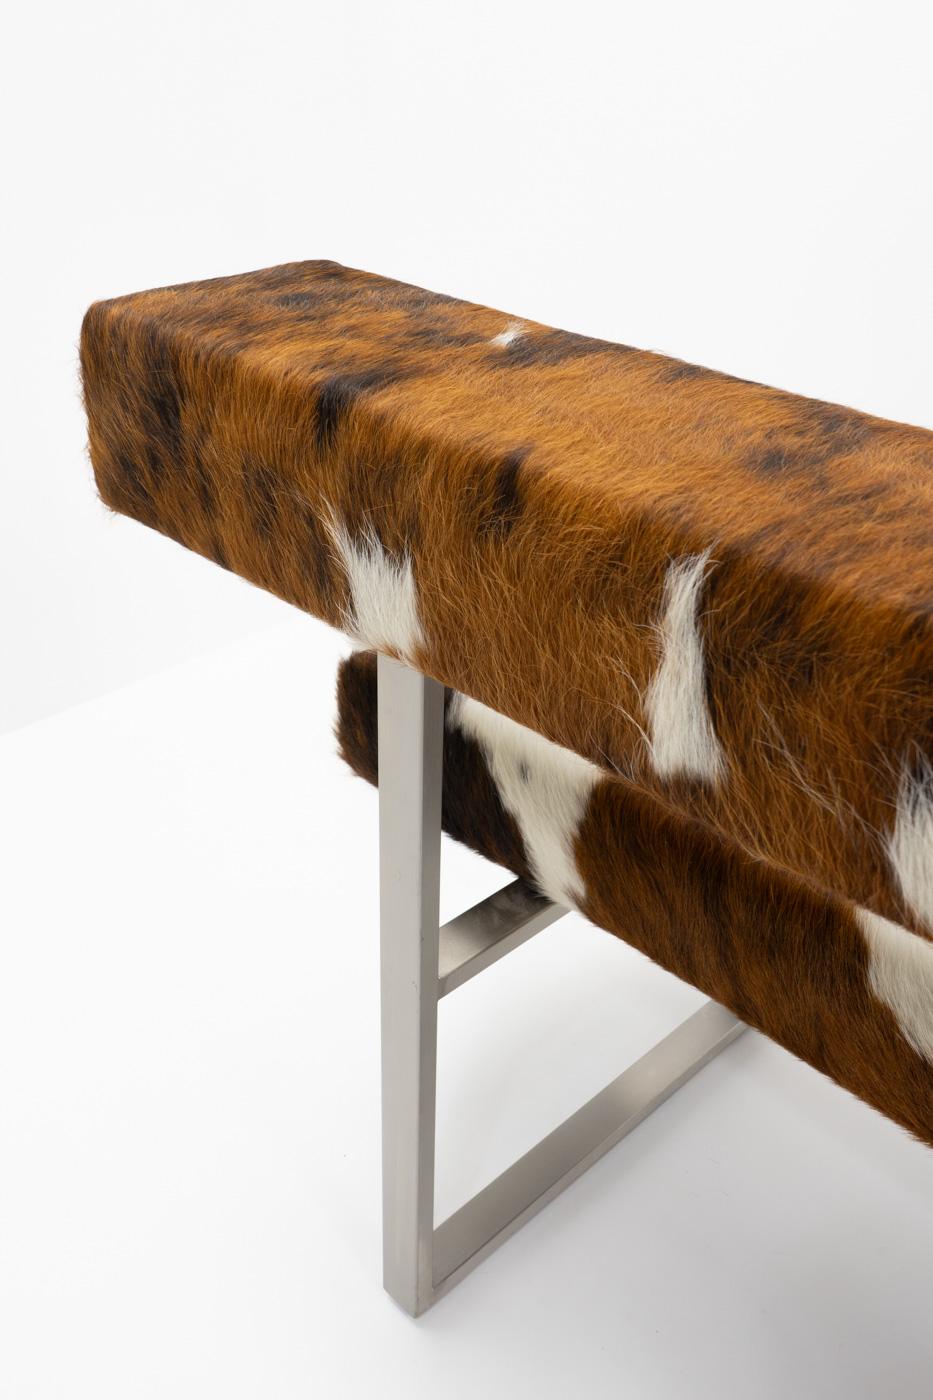 Swiss Design Permesso Bench in cowhide, by Girsberger - 2000s For Sale 6